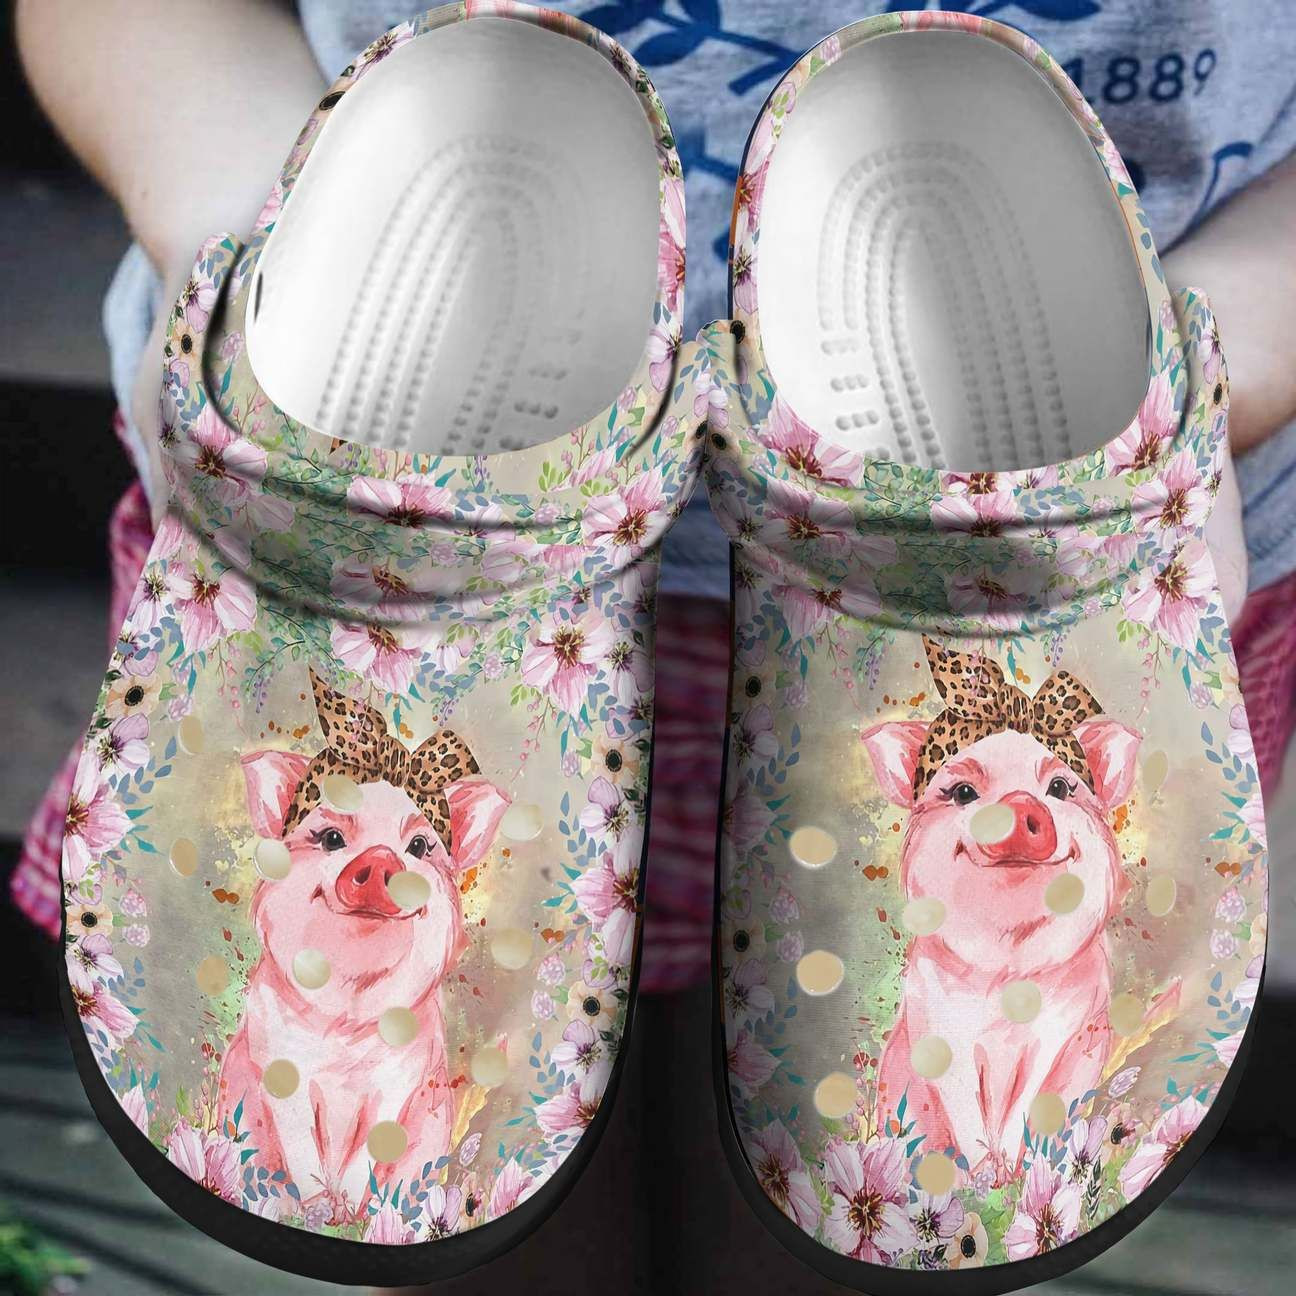 Pig Personalized Clog Custom Crocs Comfortablefashion Style Comfortable For Women Men Kid Print 3D Pig With Flowers